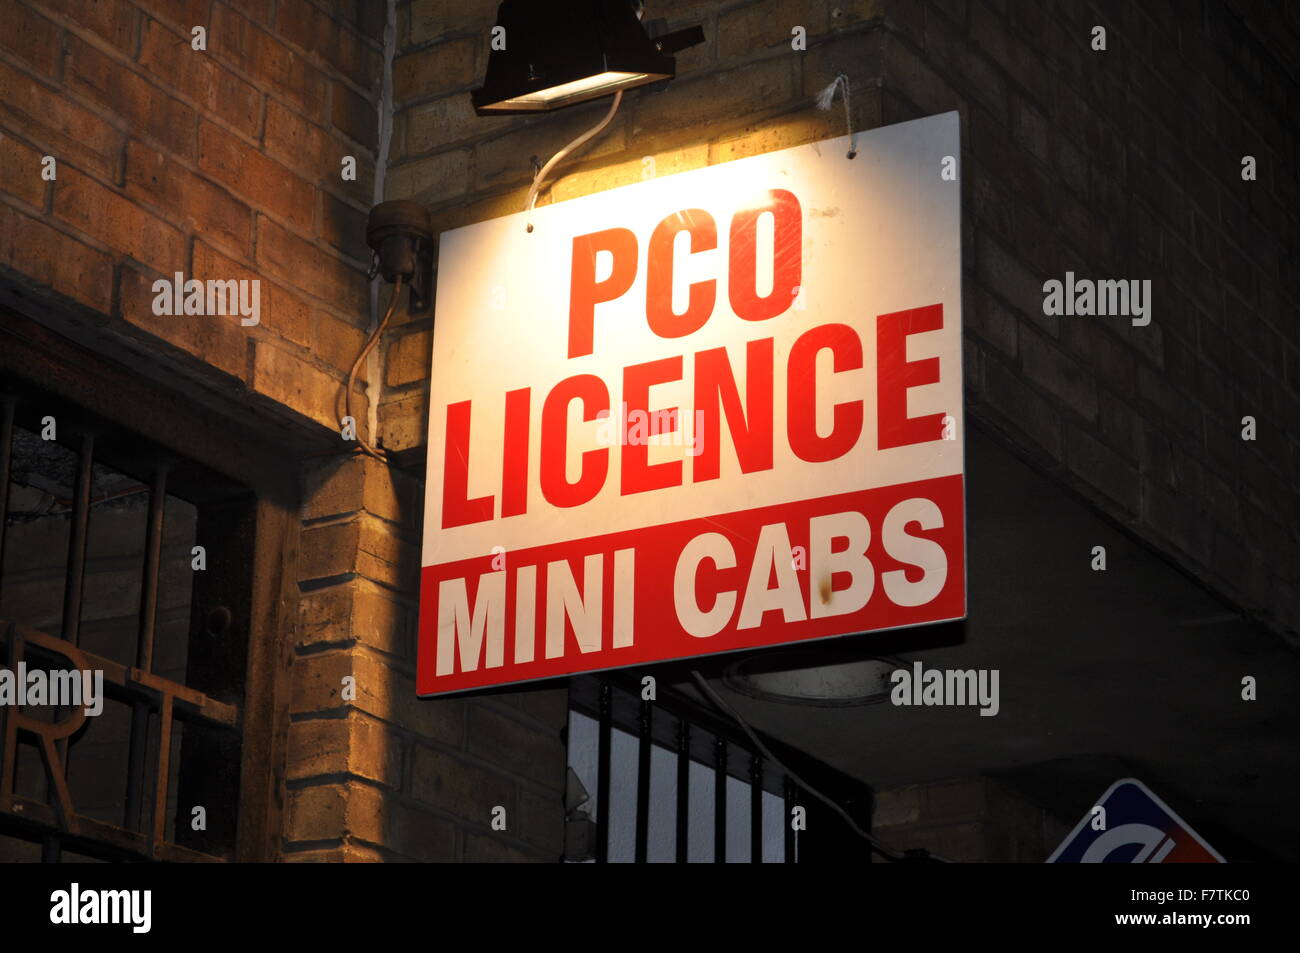 A brightly lit mini cab service sign in London at night Stock Photo